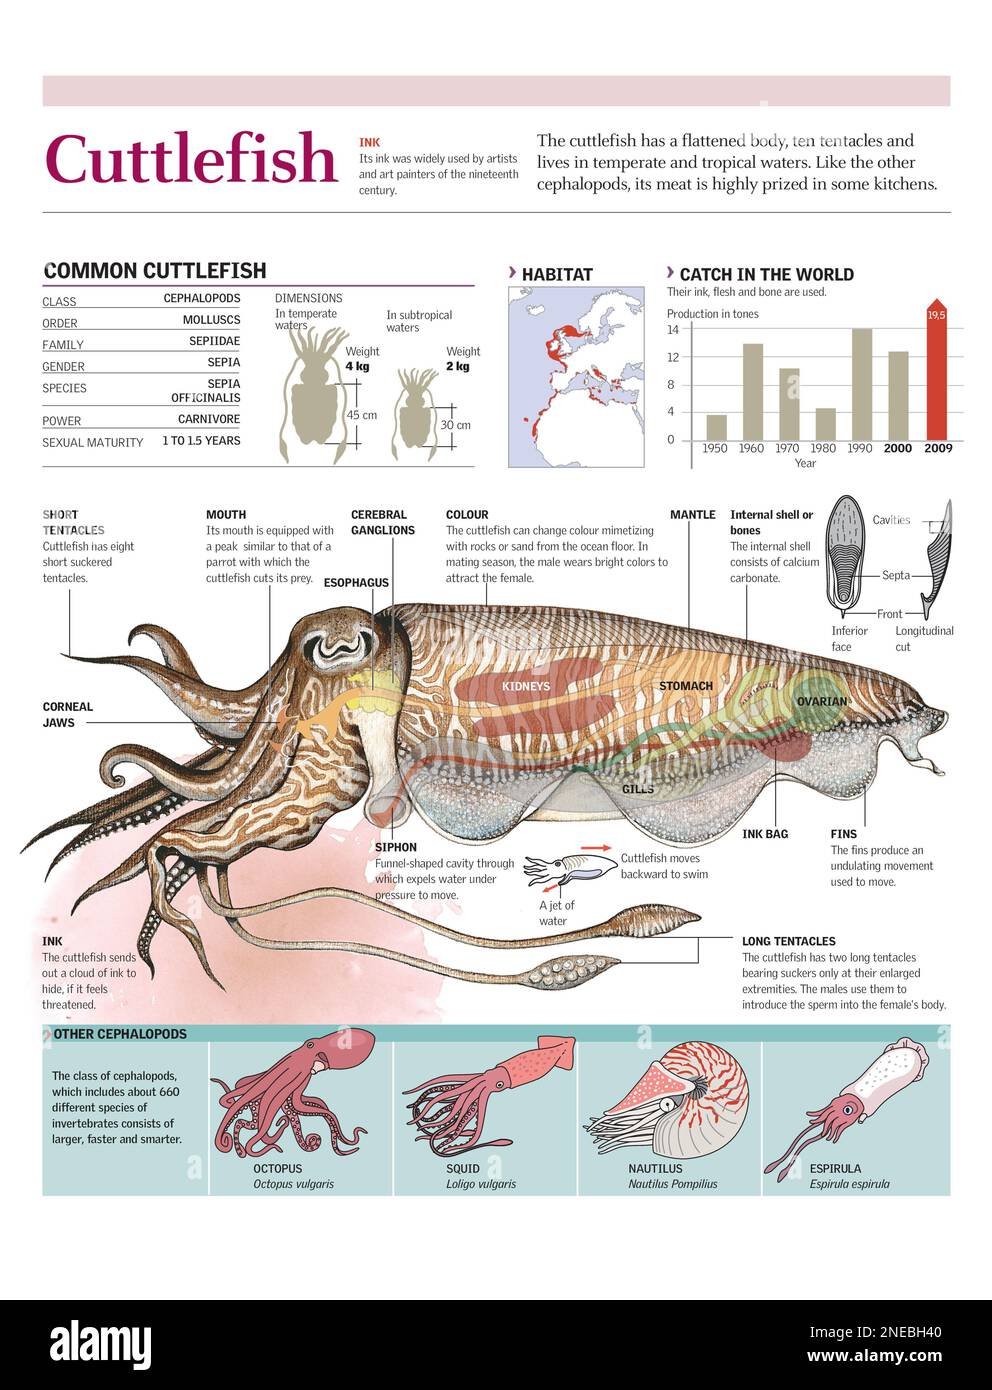 Infographics of the anatomy, habitat and locomotion of the cuttlefish and the world catch. [Adobe Illustrator (.ai); 2480x3248]. Stock Photo